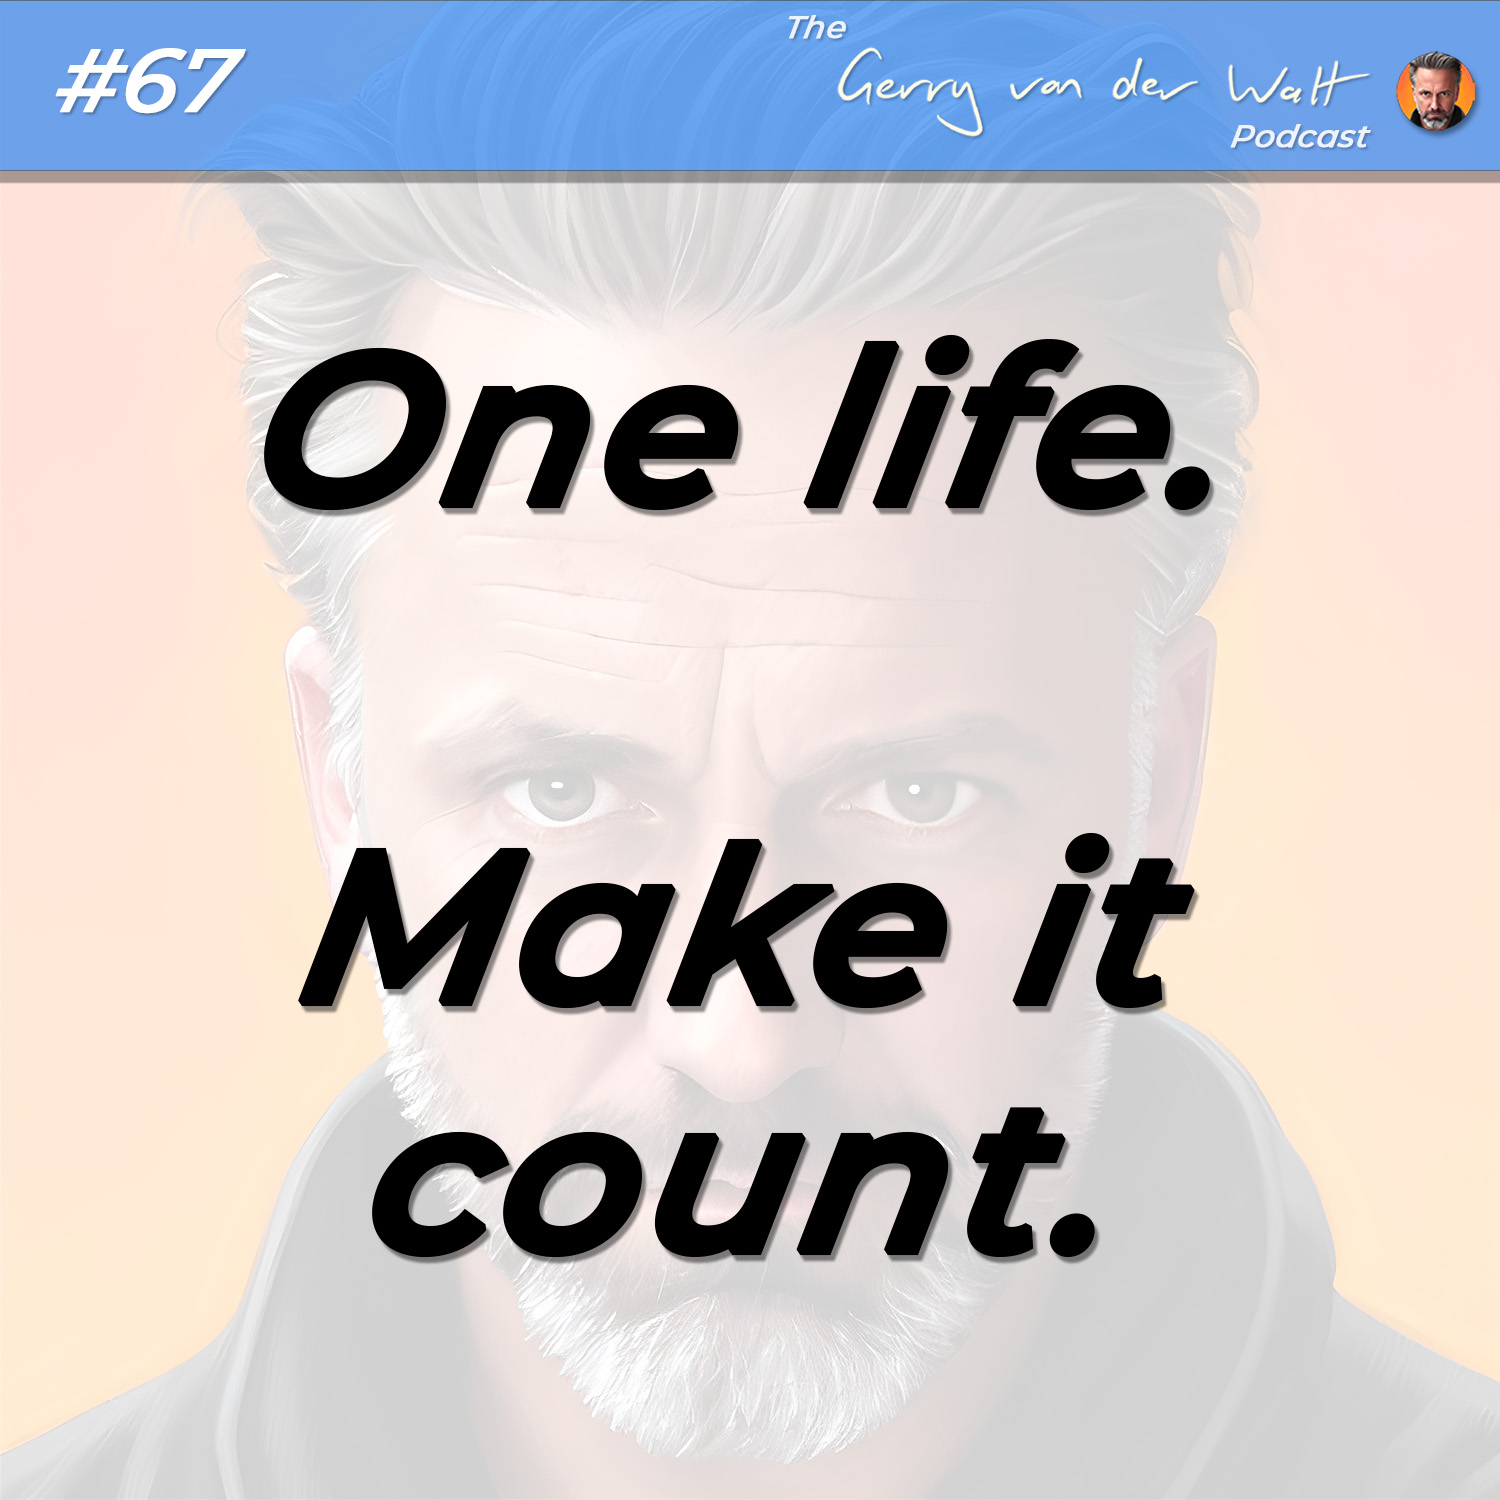 #67 - One life - Make it count